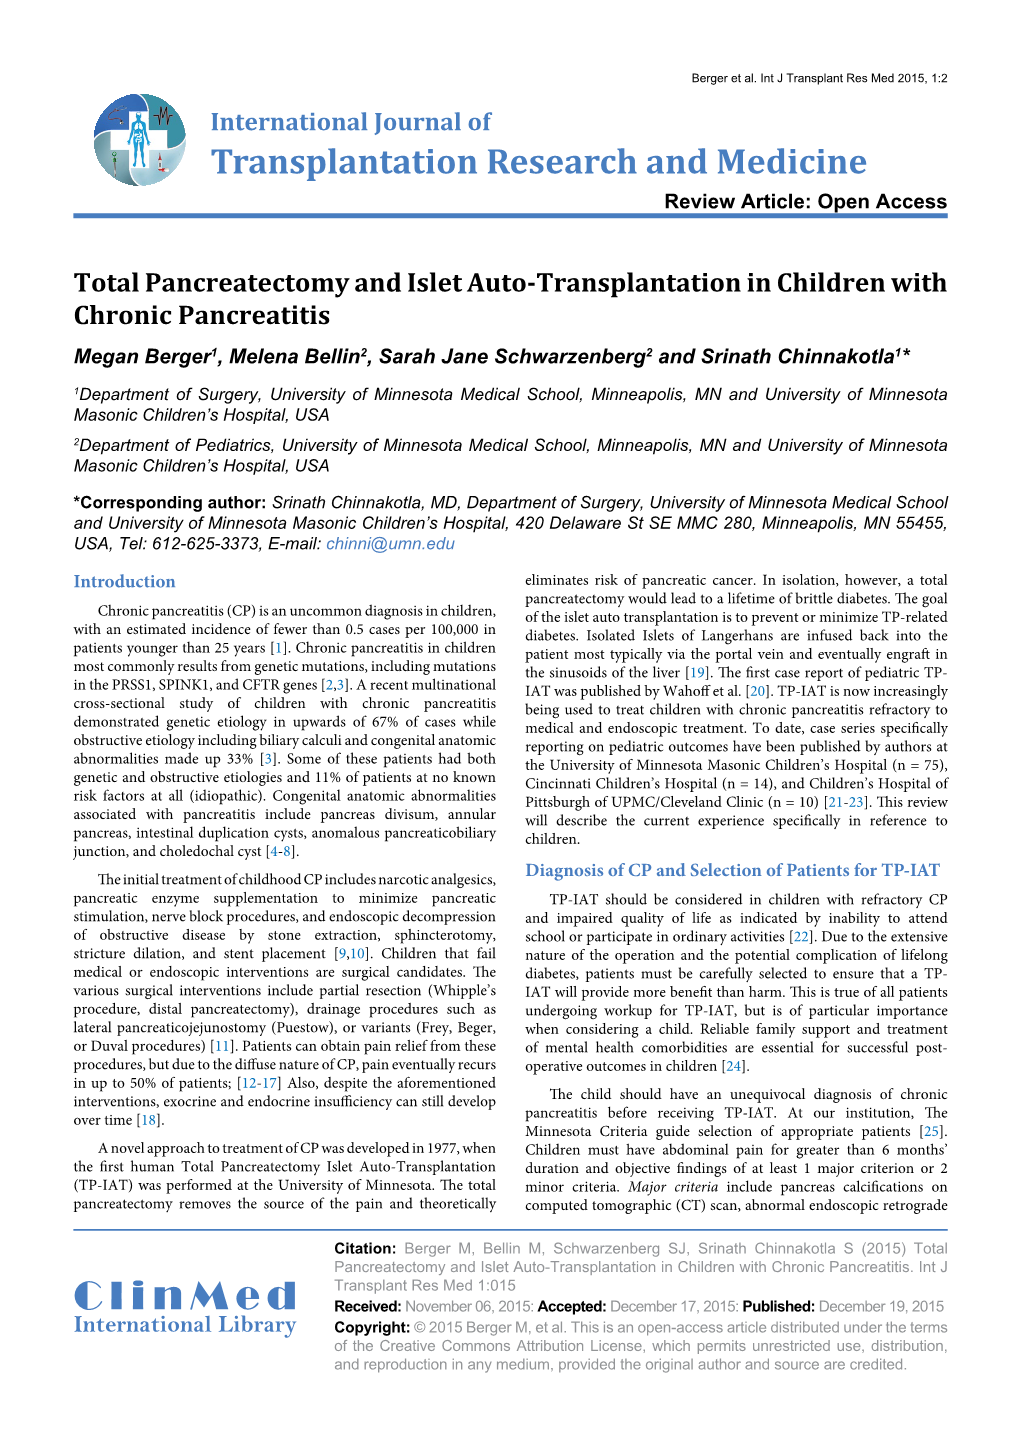 Total Pancreatectomy and Islet Auto-Transplantation in Children